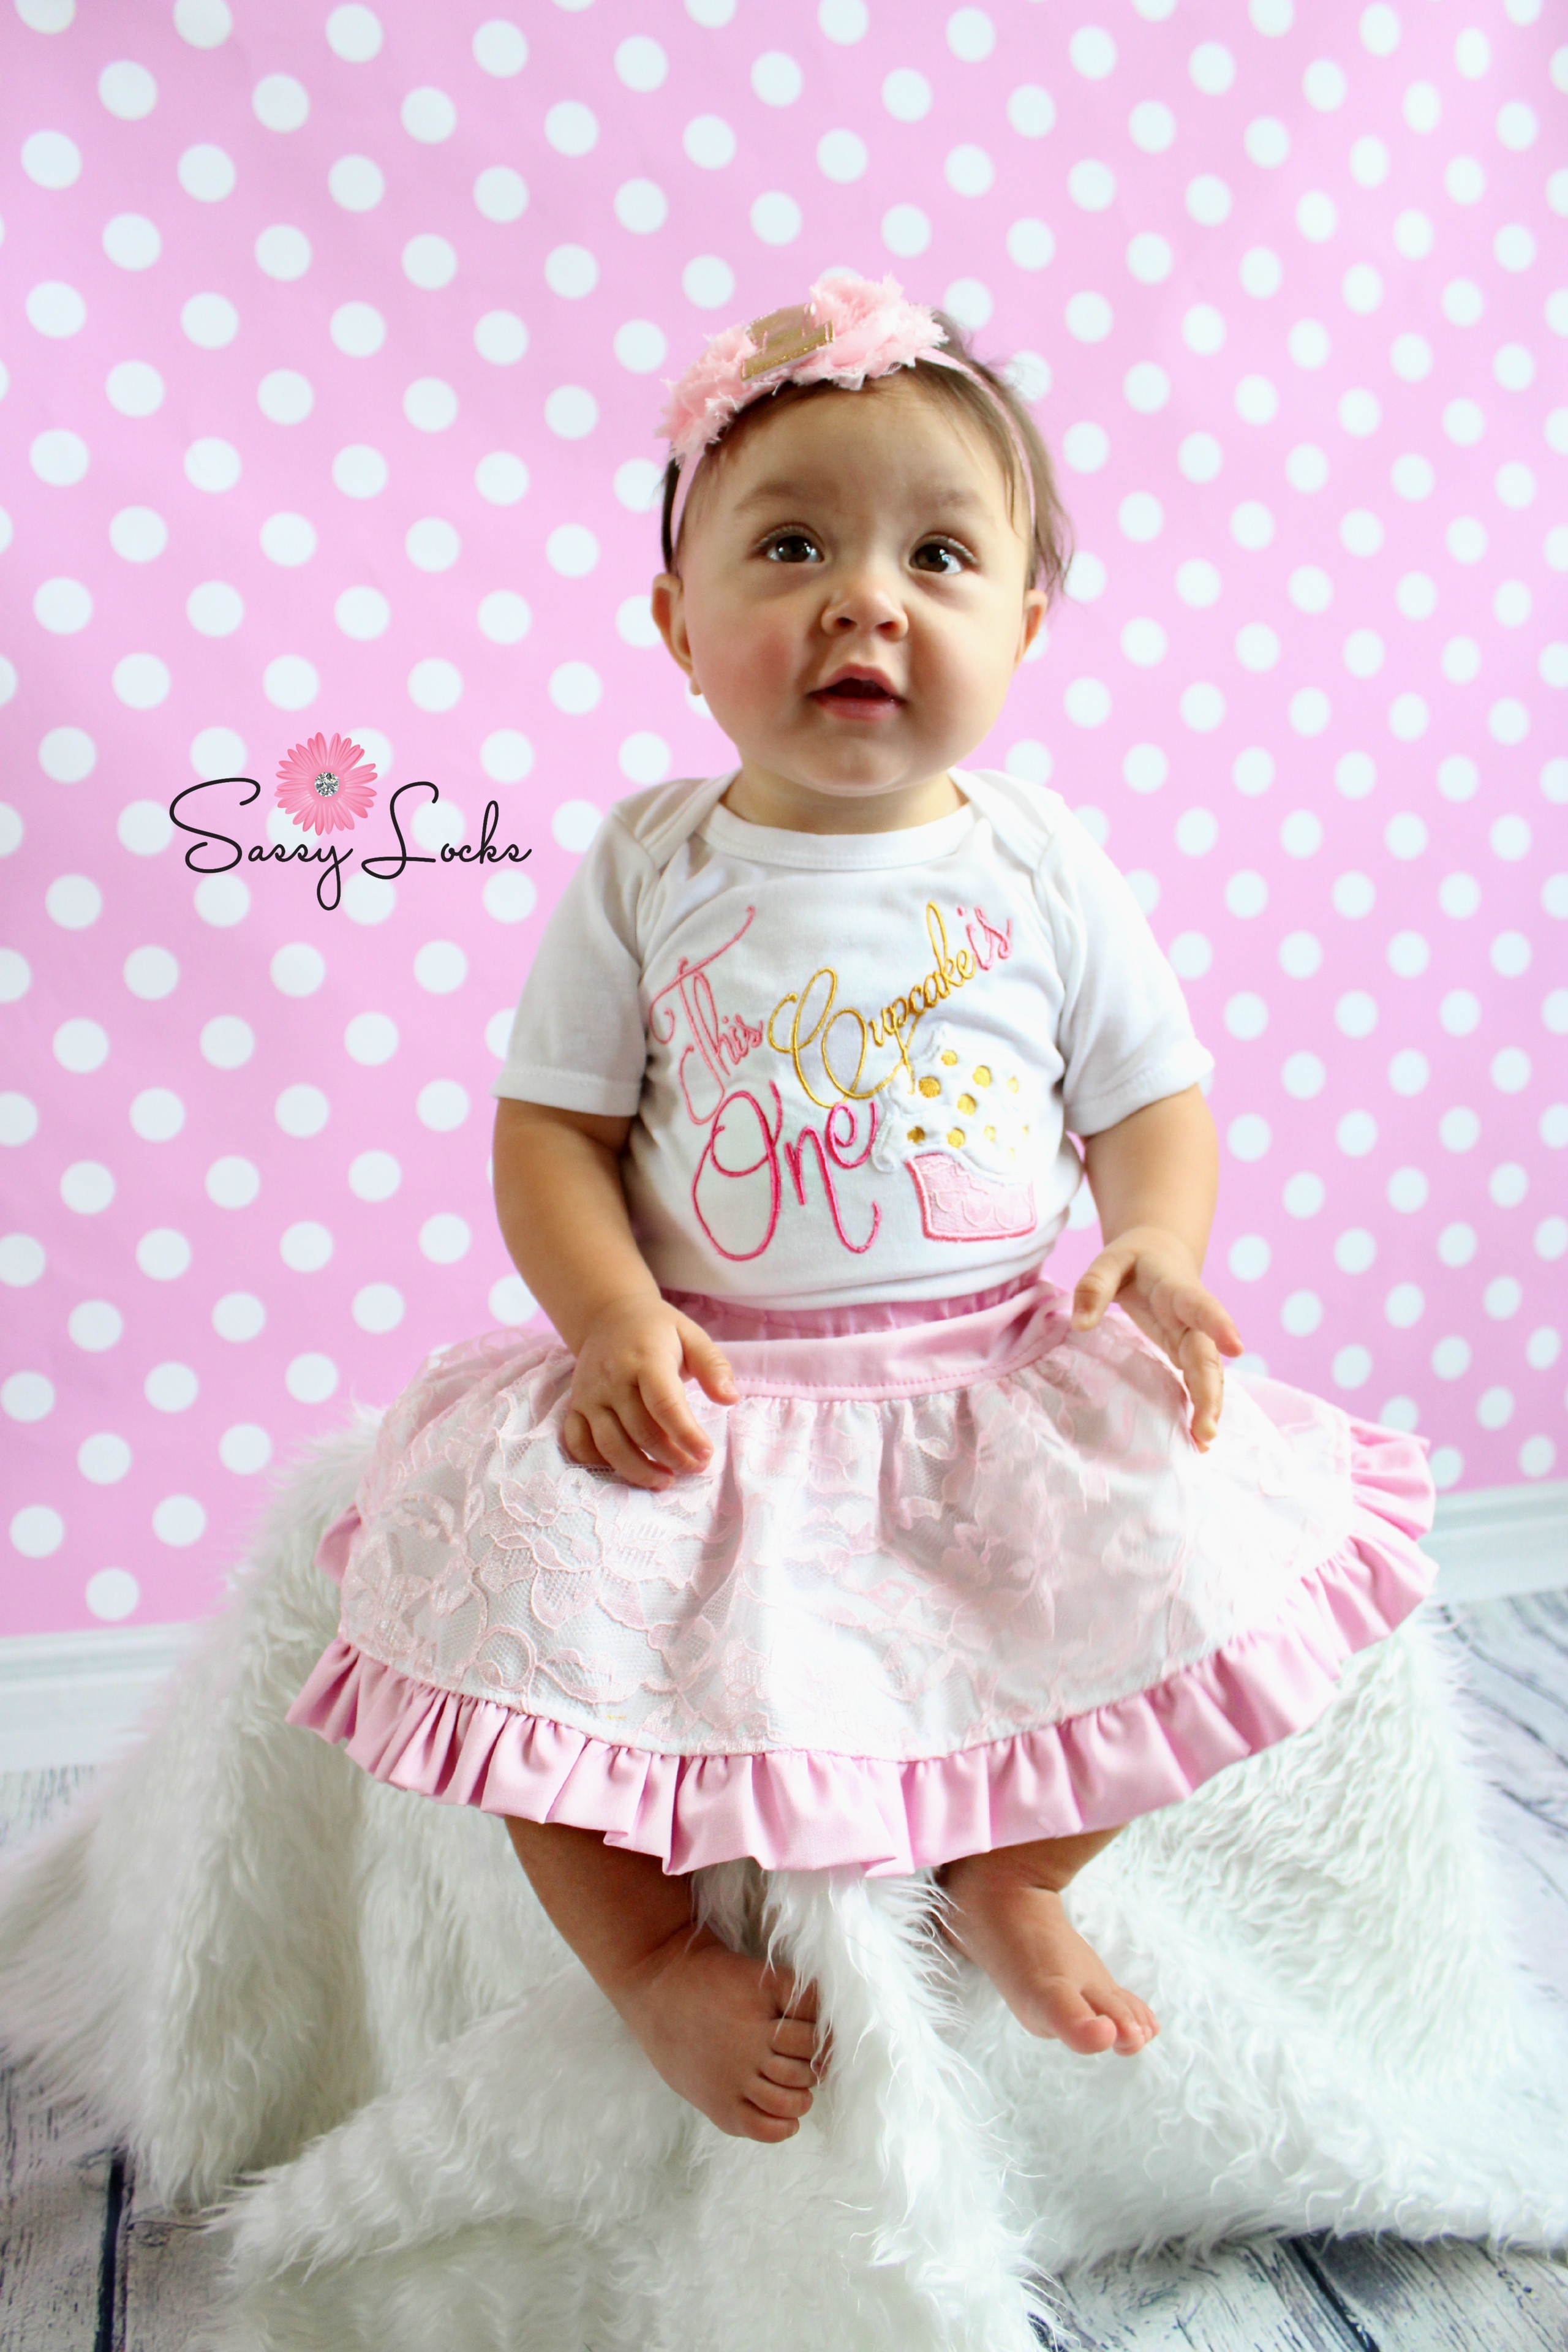 Details about   First birthday princess outfit princess birthday shirt first birthday outfit g